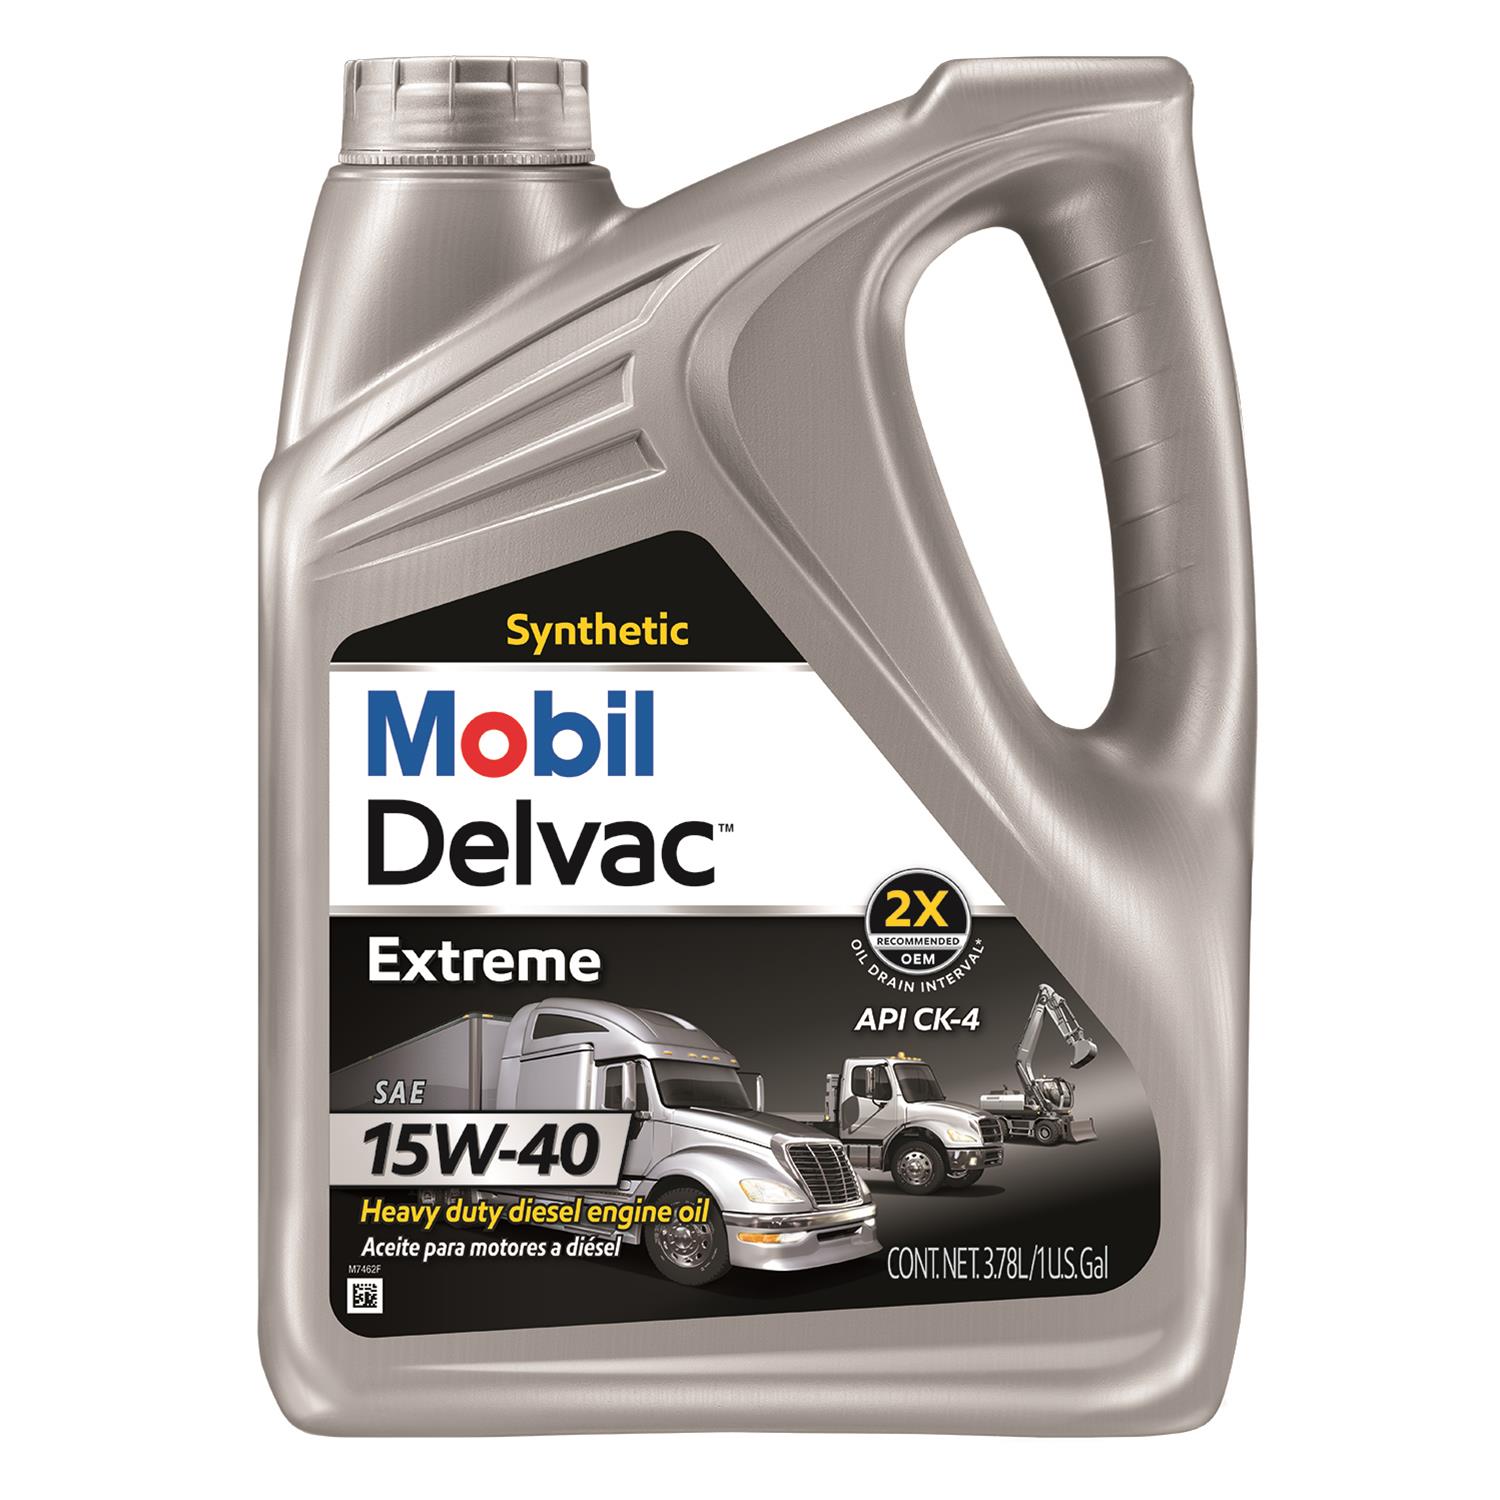 122448-1 Delvac Extreme Synthetic Motor Oil, 15W-40, 1-Gallon